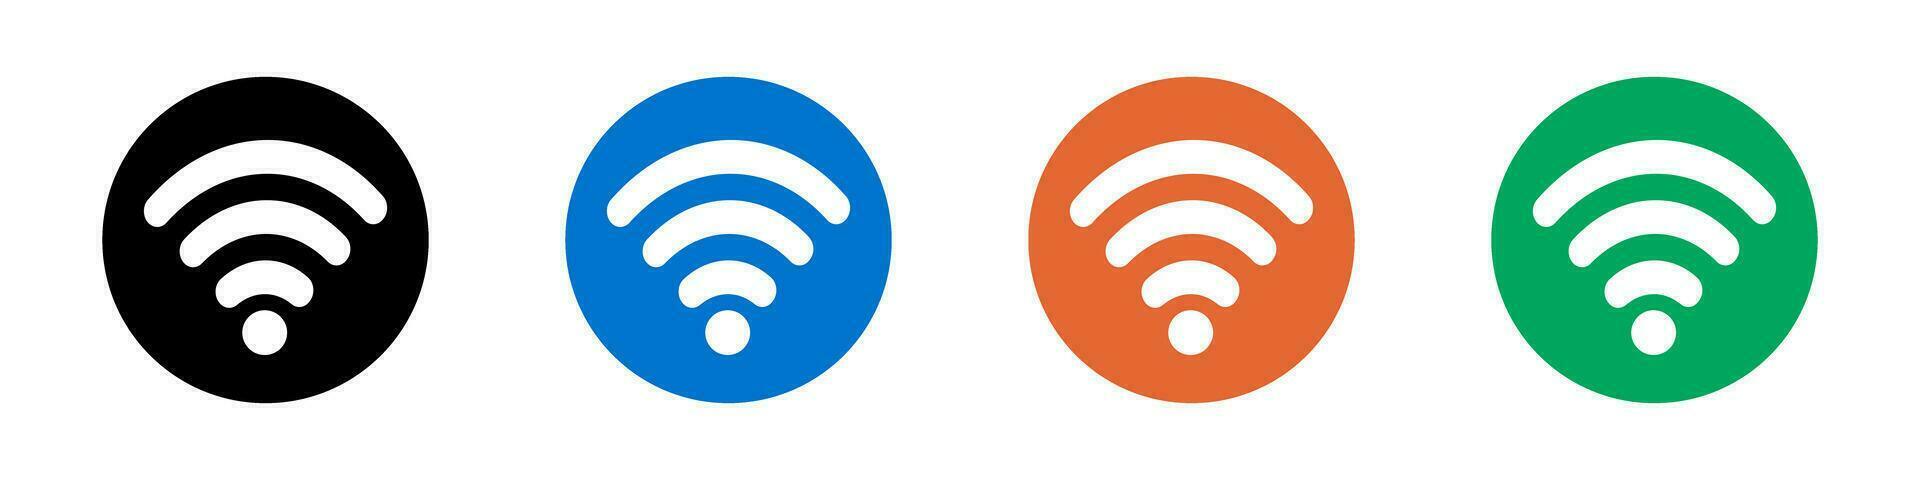 Colorful round Wi-Fi icons. Internet communication icons. Vector. vector